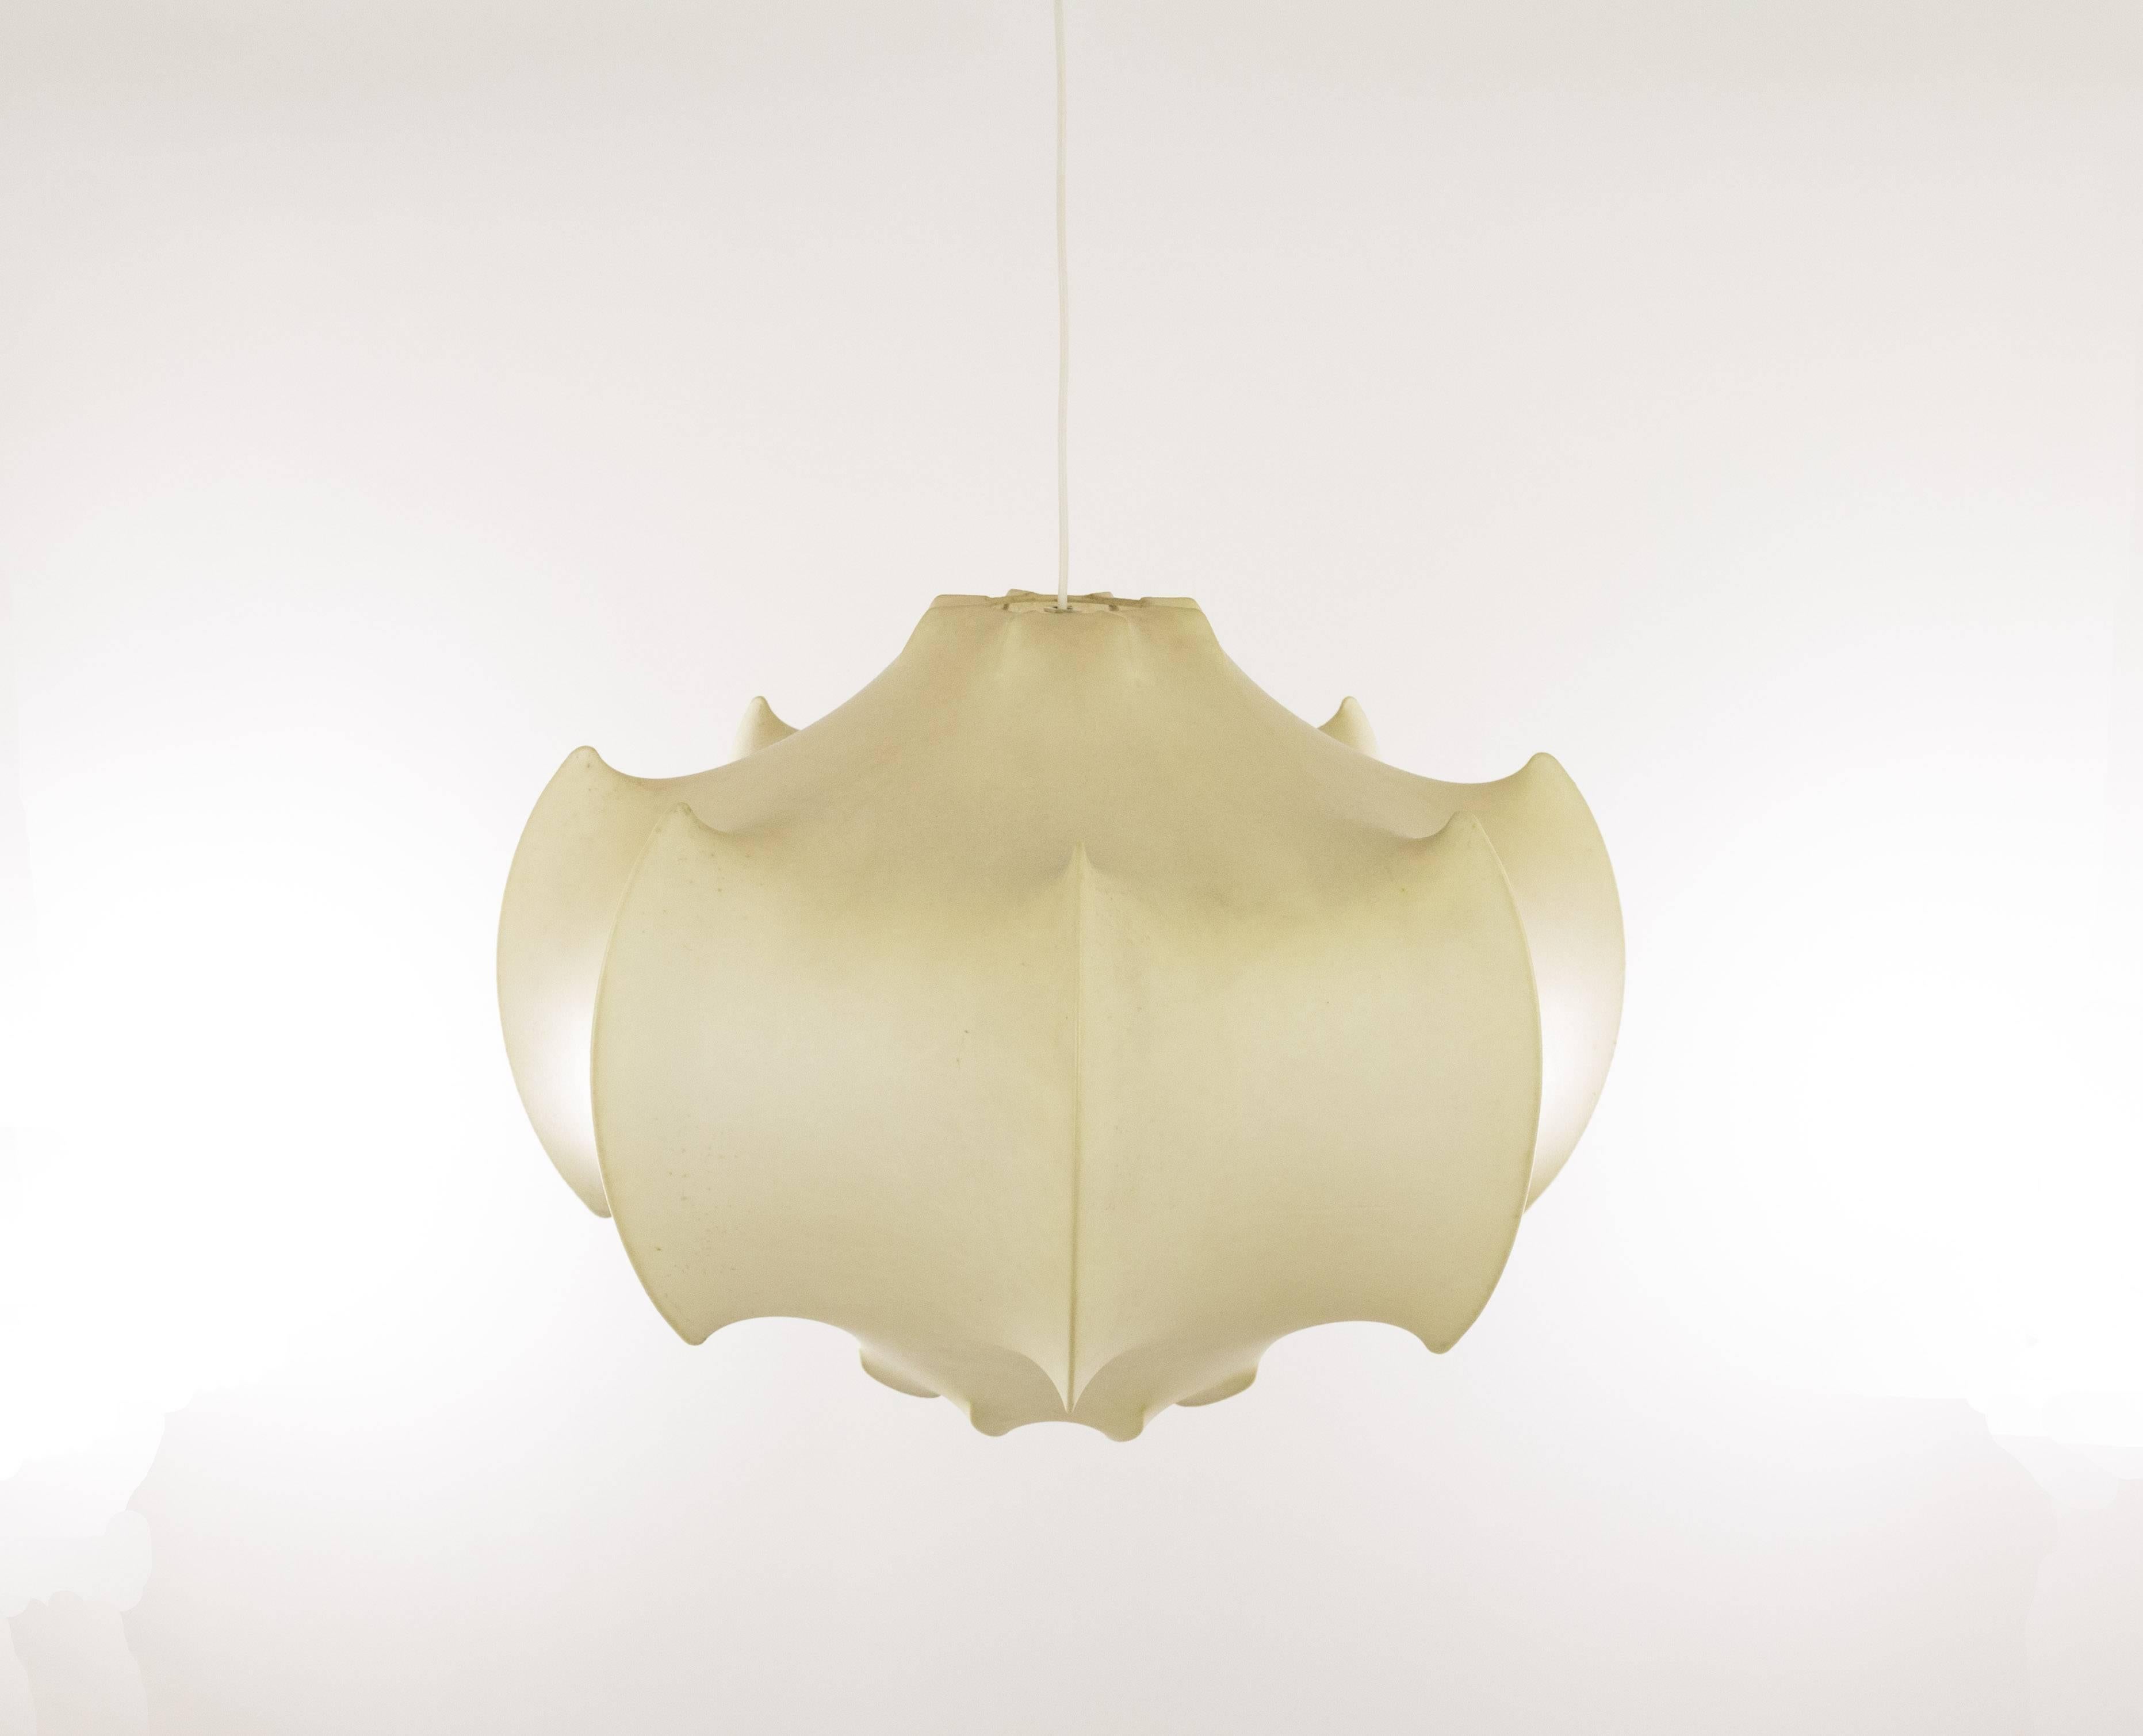 Achille and Pier Giacomo Castiglioni designed the Viscontea pendant for Flos using the then new material,
'cocoon' polymer. The result is a very original design in a cloud-like material that emanates a diffused light.

The lamp consists of a